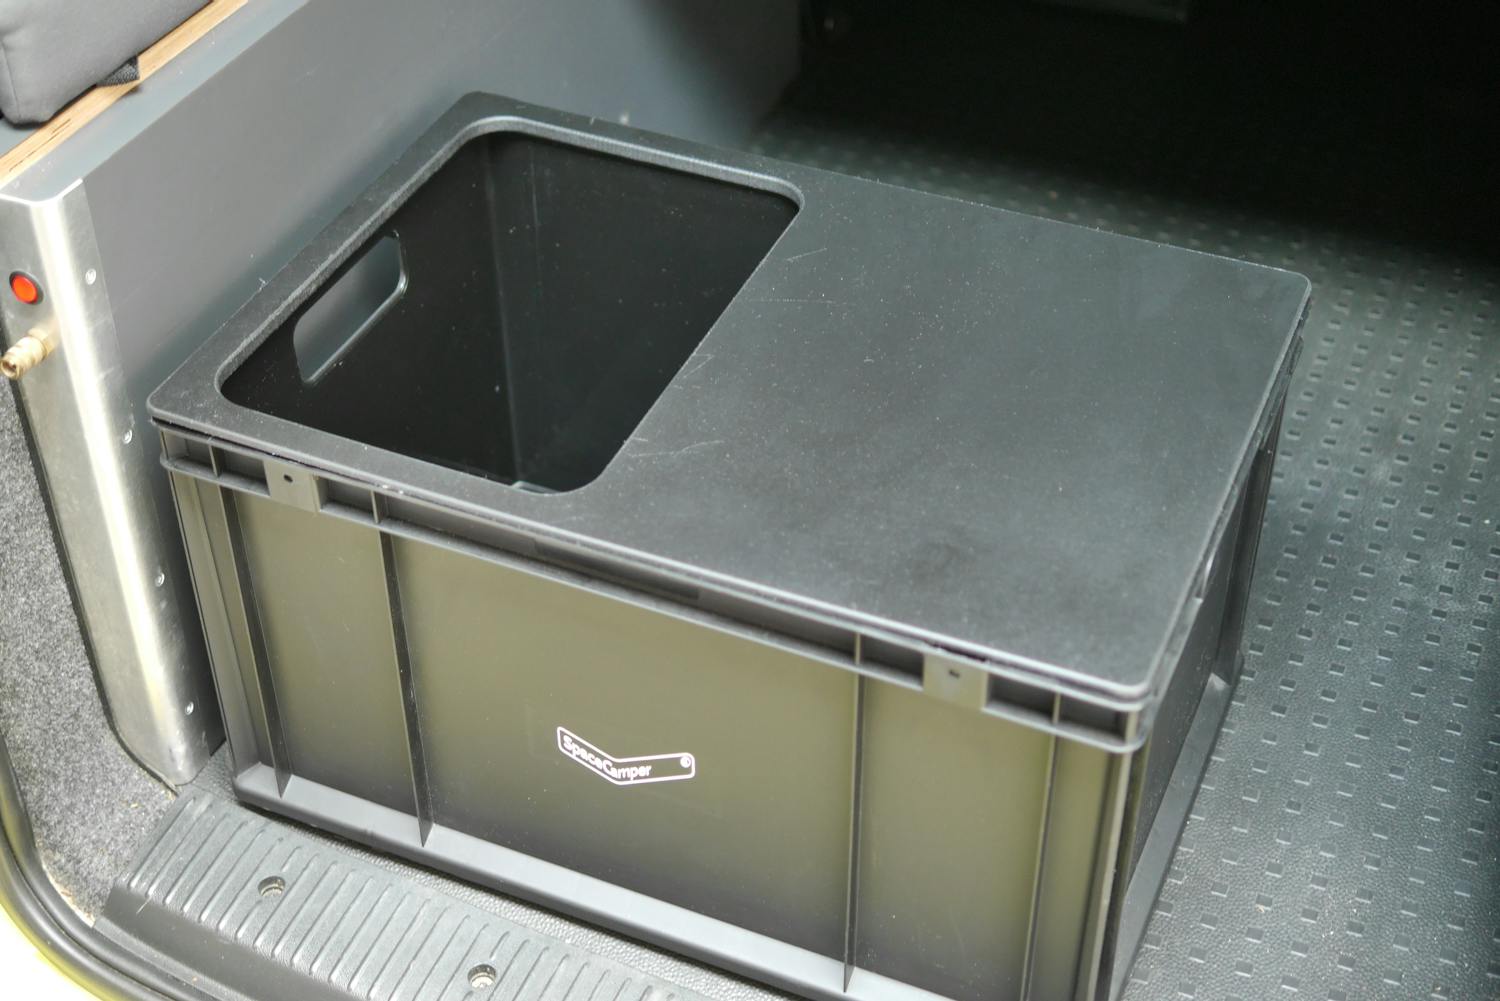 Large lid with sink cut-out